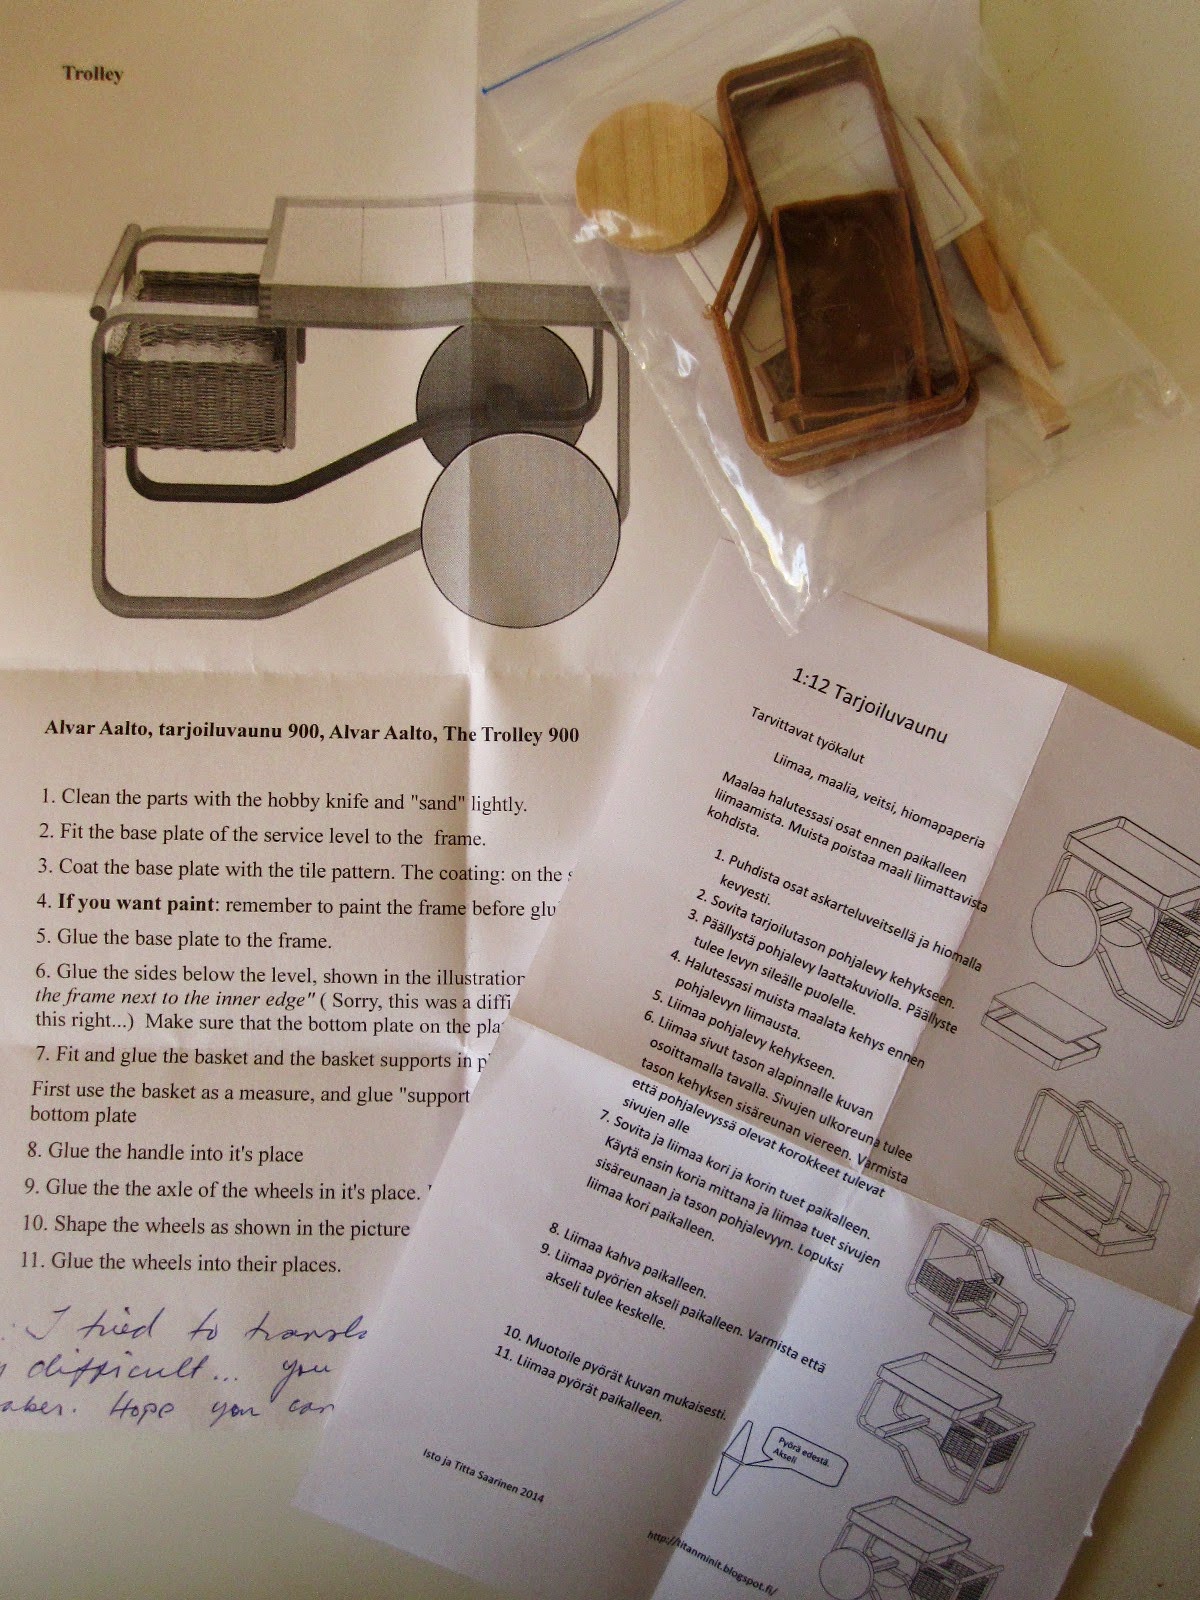 Pieces for a kitset miniature Aalto 900 trolley, plus instructions sheets in Finnish and English.